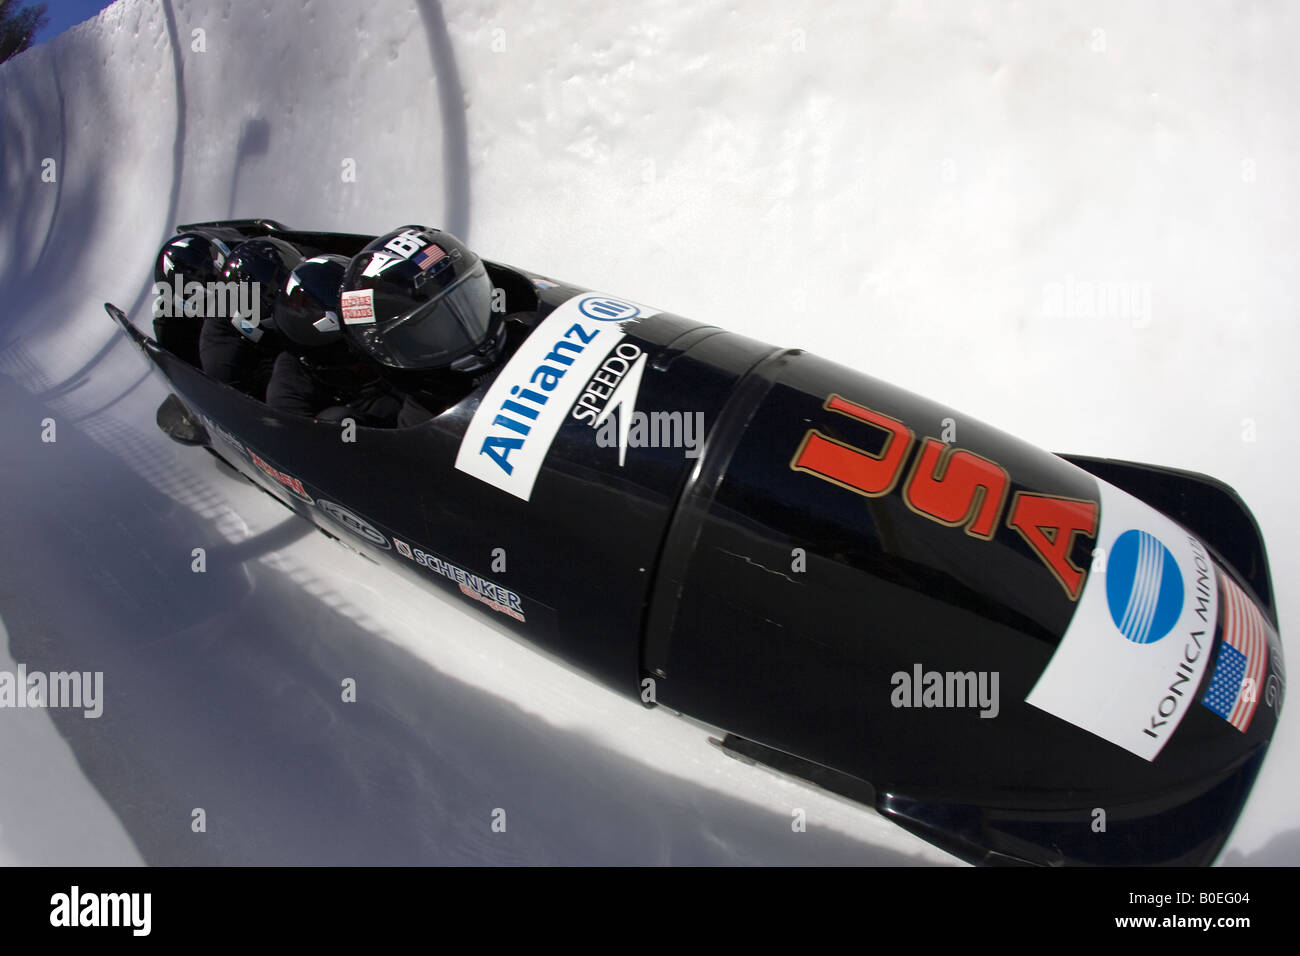 United States 4 man Bobsleigh team running the Olympic course at St Moritz Stock Photo